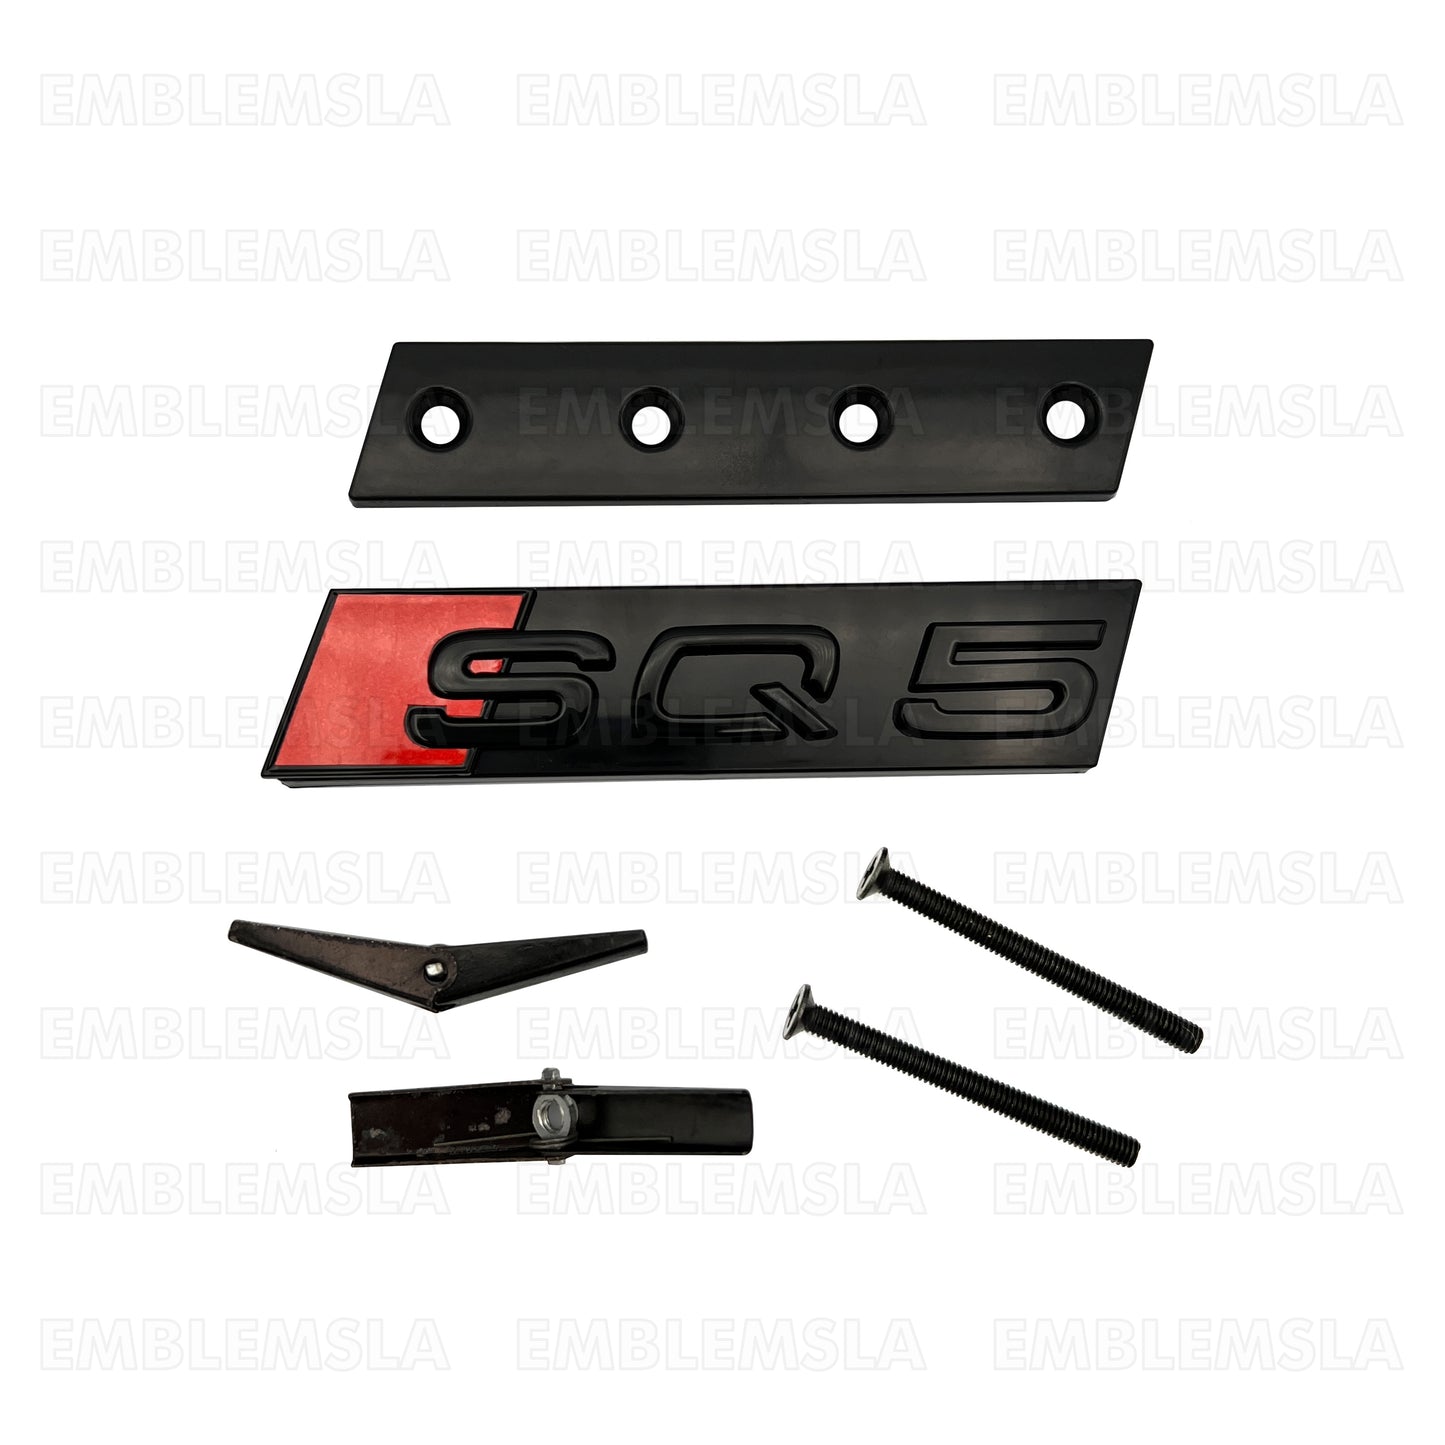 Audi SQ5 Front Grill Emblem Gloss Black for Q5 SQ5 Hood Grille Badge Nameplate